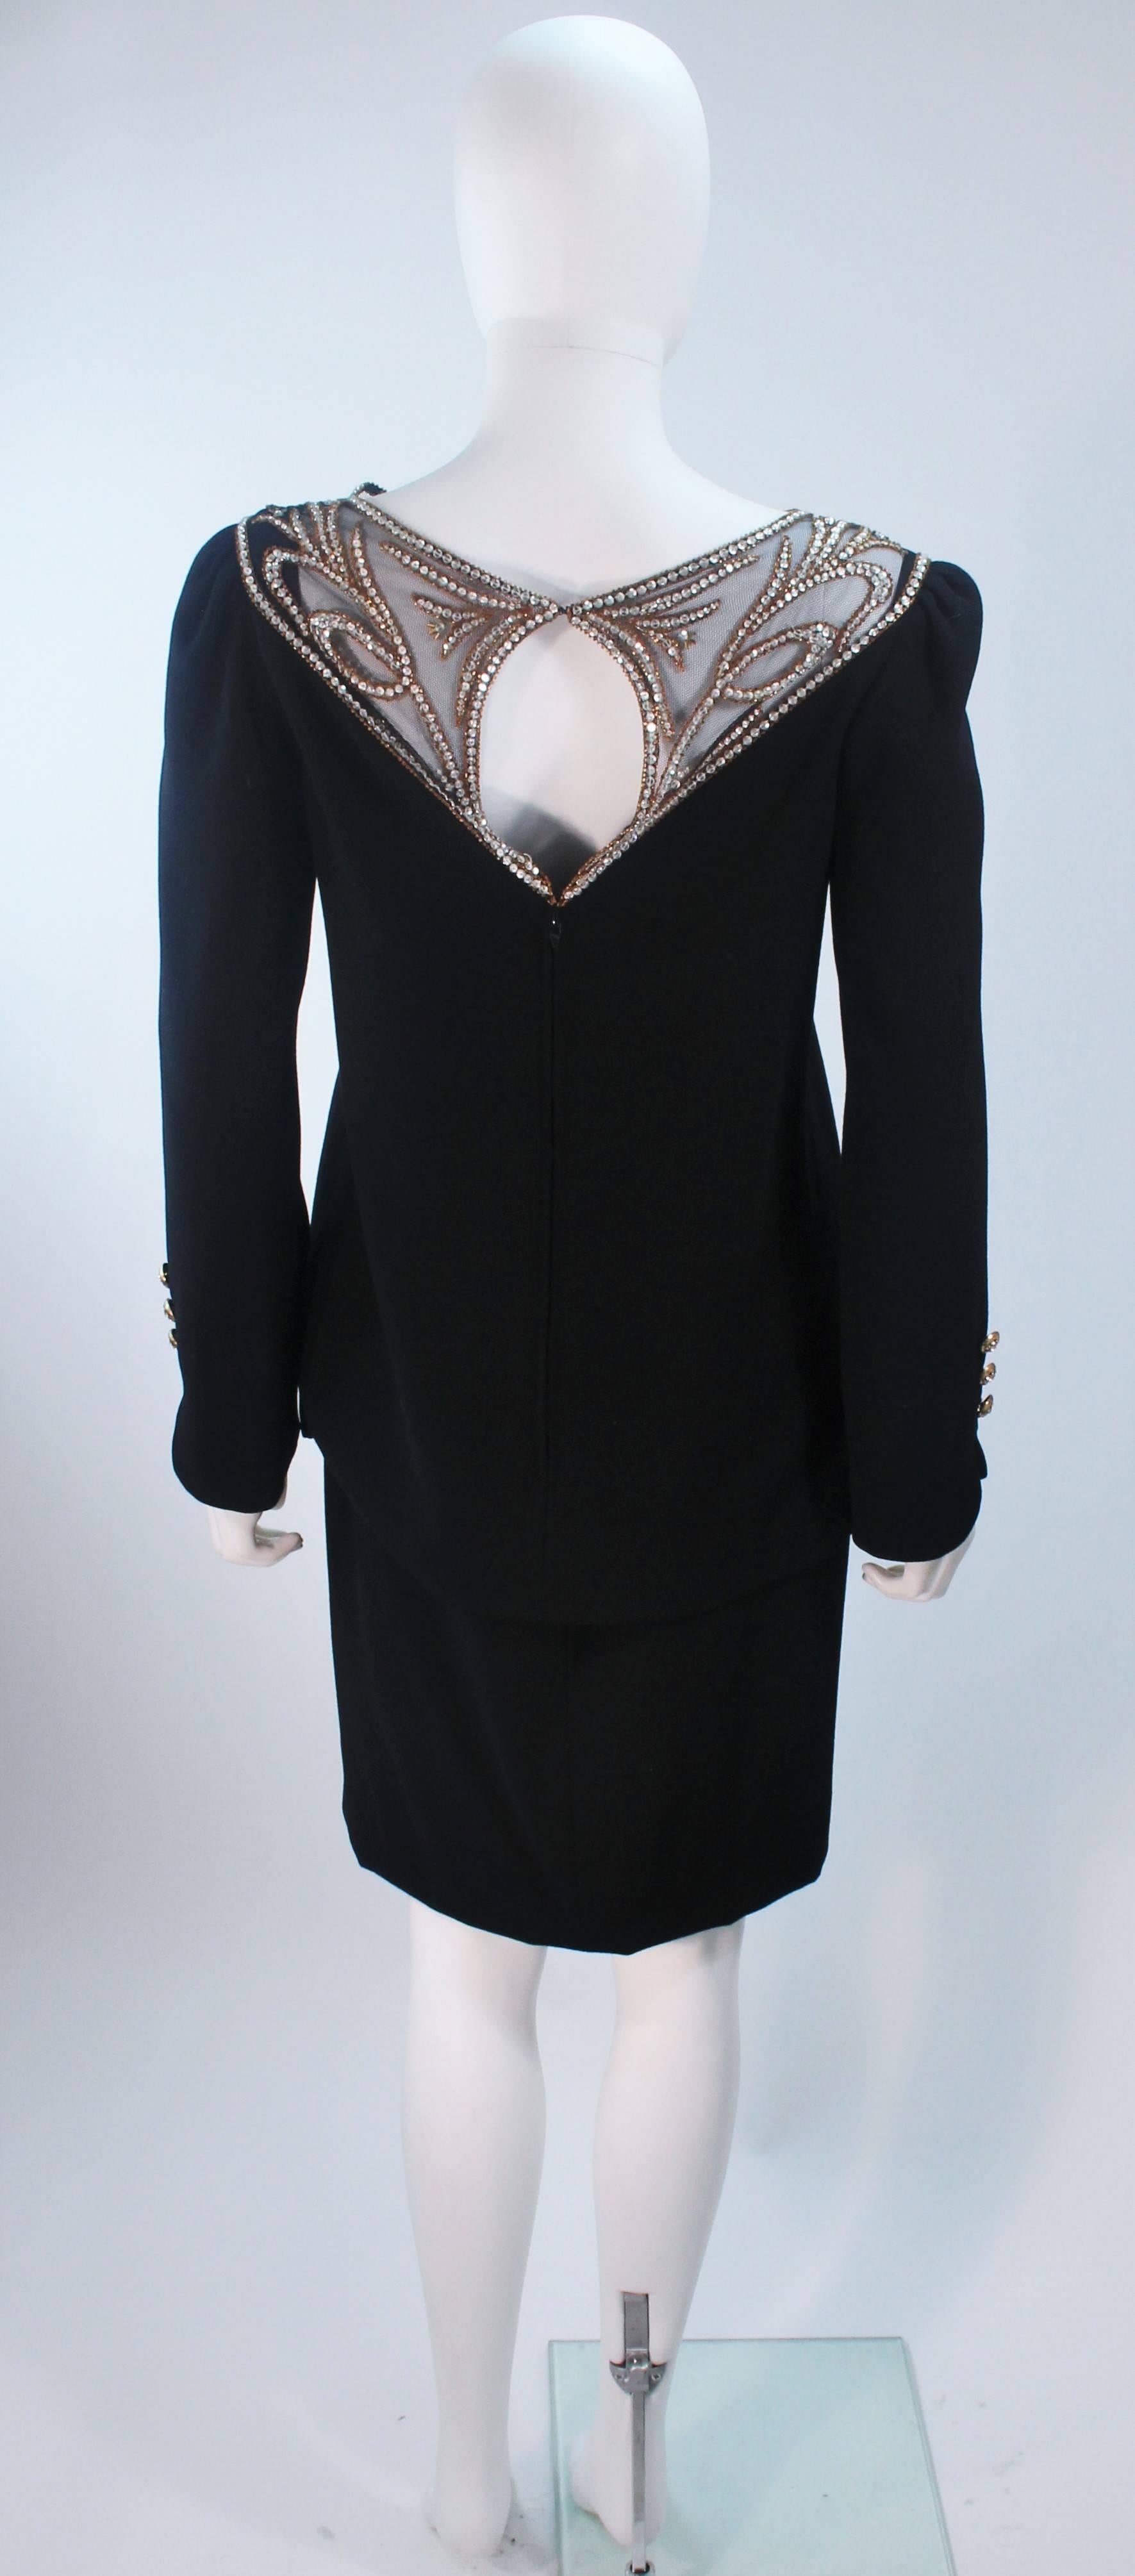 BOB MACKIE Black Skirt Suit Ensemble with Sheer Embellished Accents Size 4-6 For Sale 2